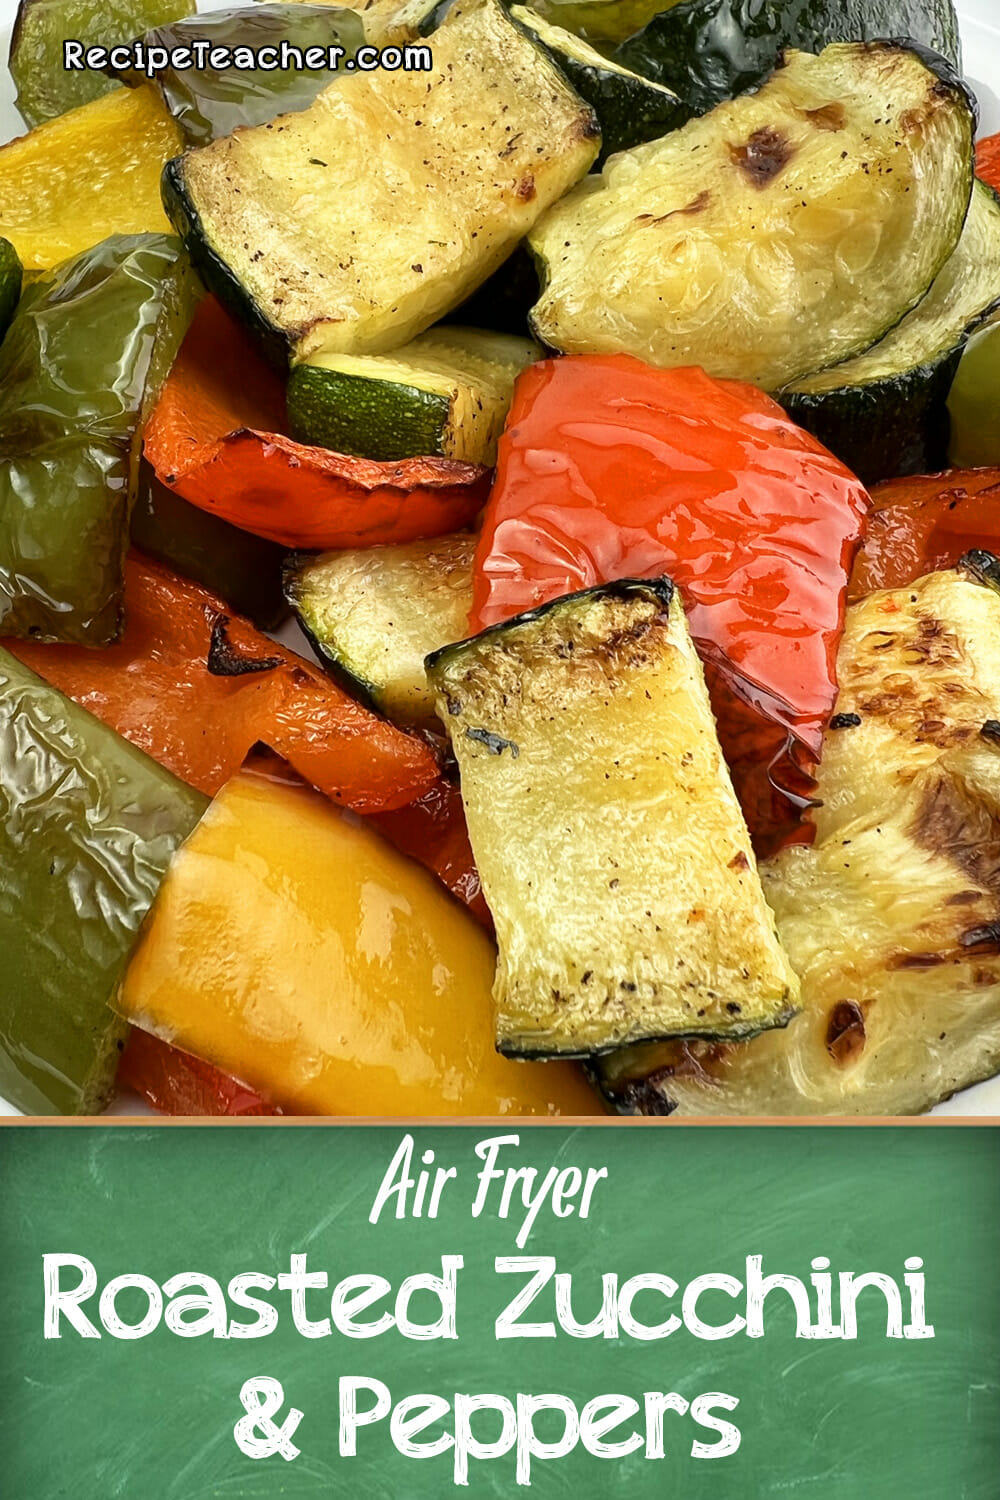 Recipe for air fryer roasted zucchini and peppers